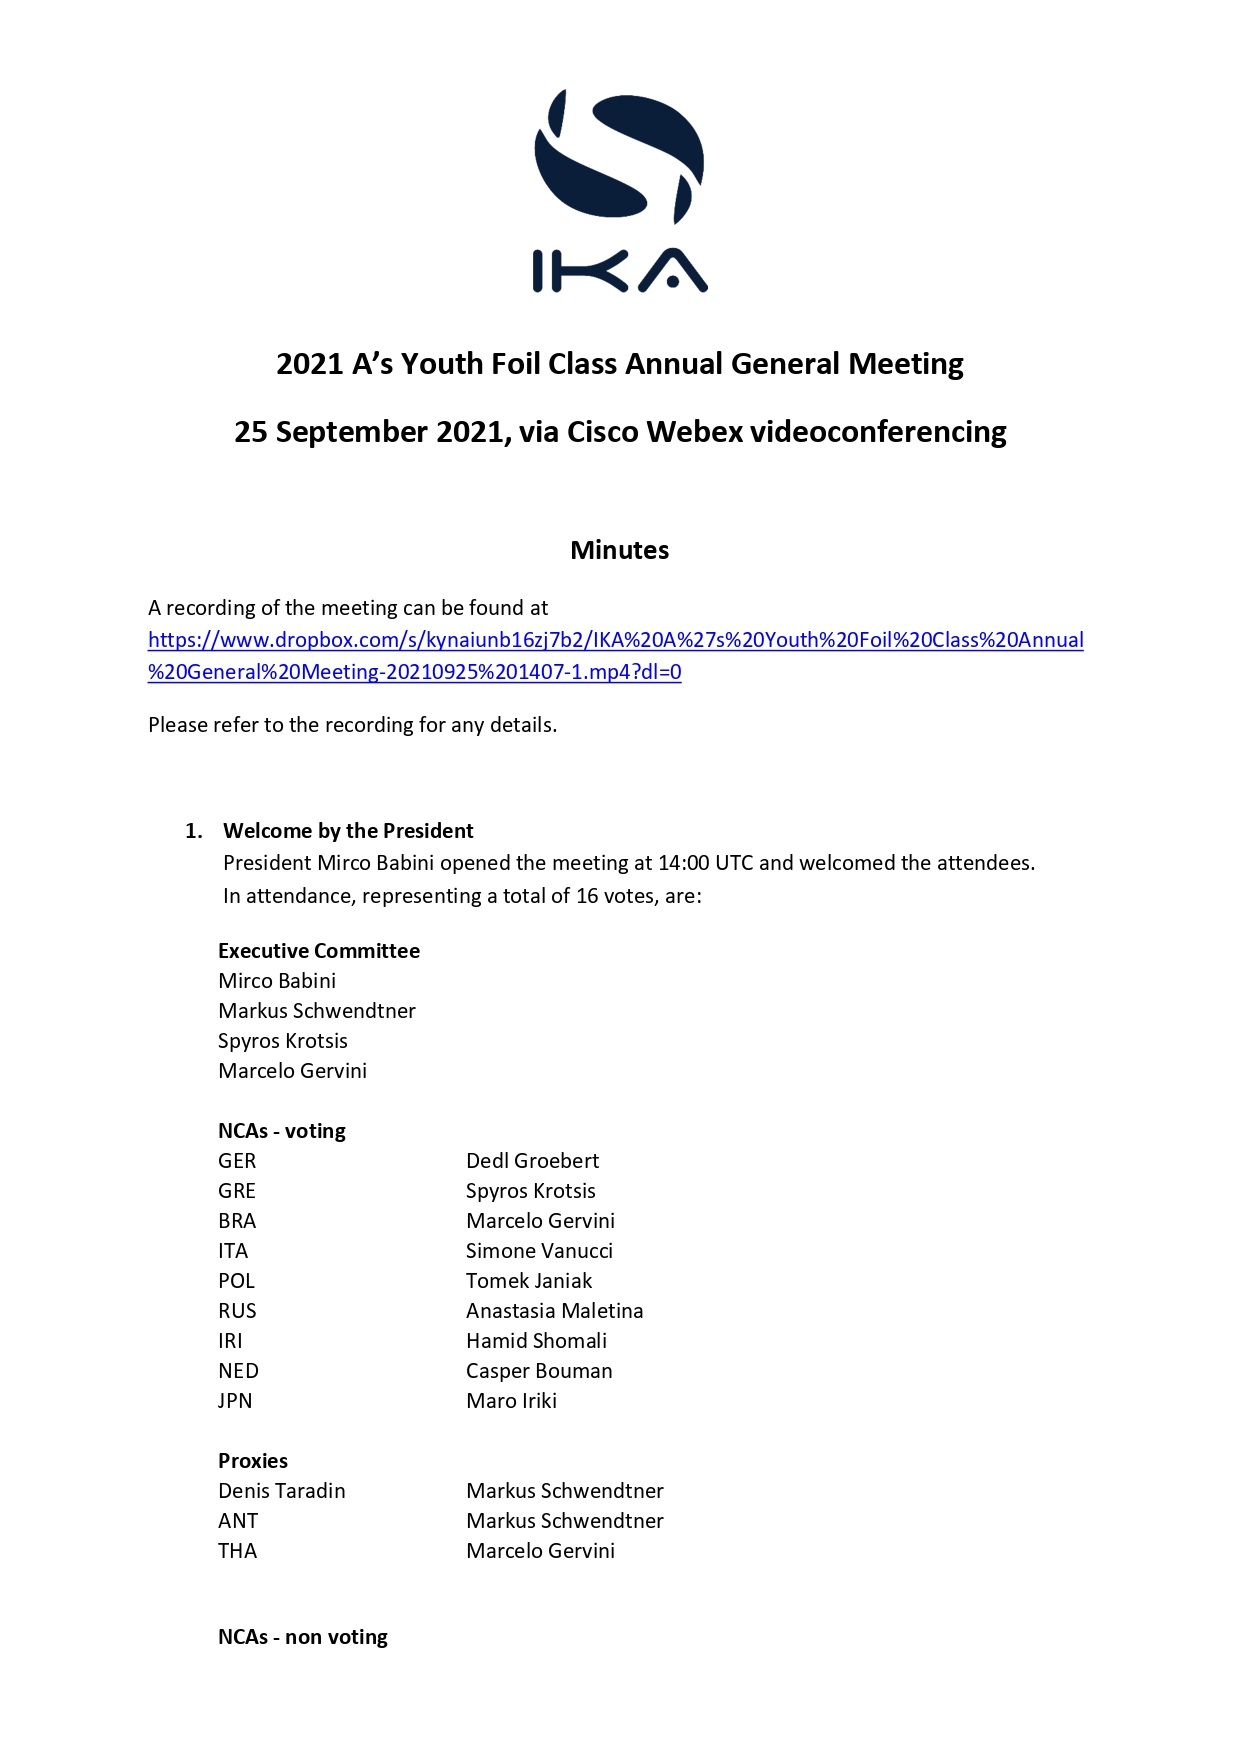 2021 AYF AGM Minutes v01 page 0001